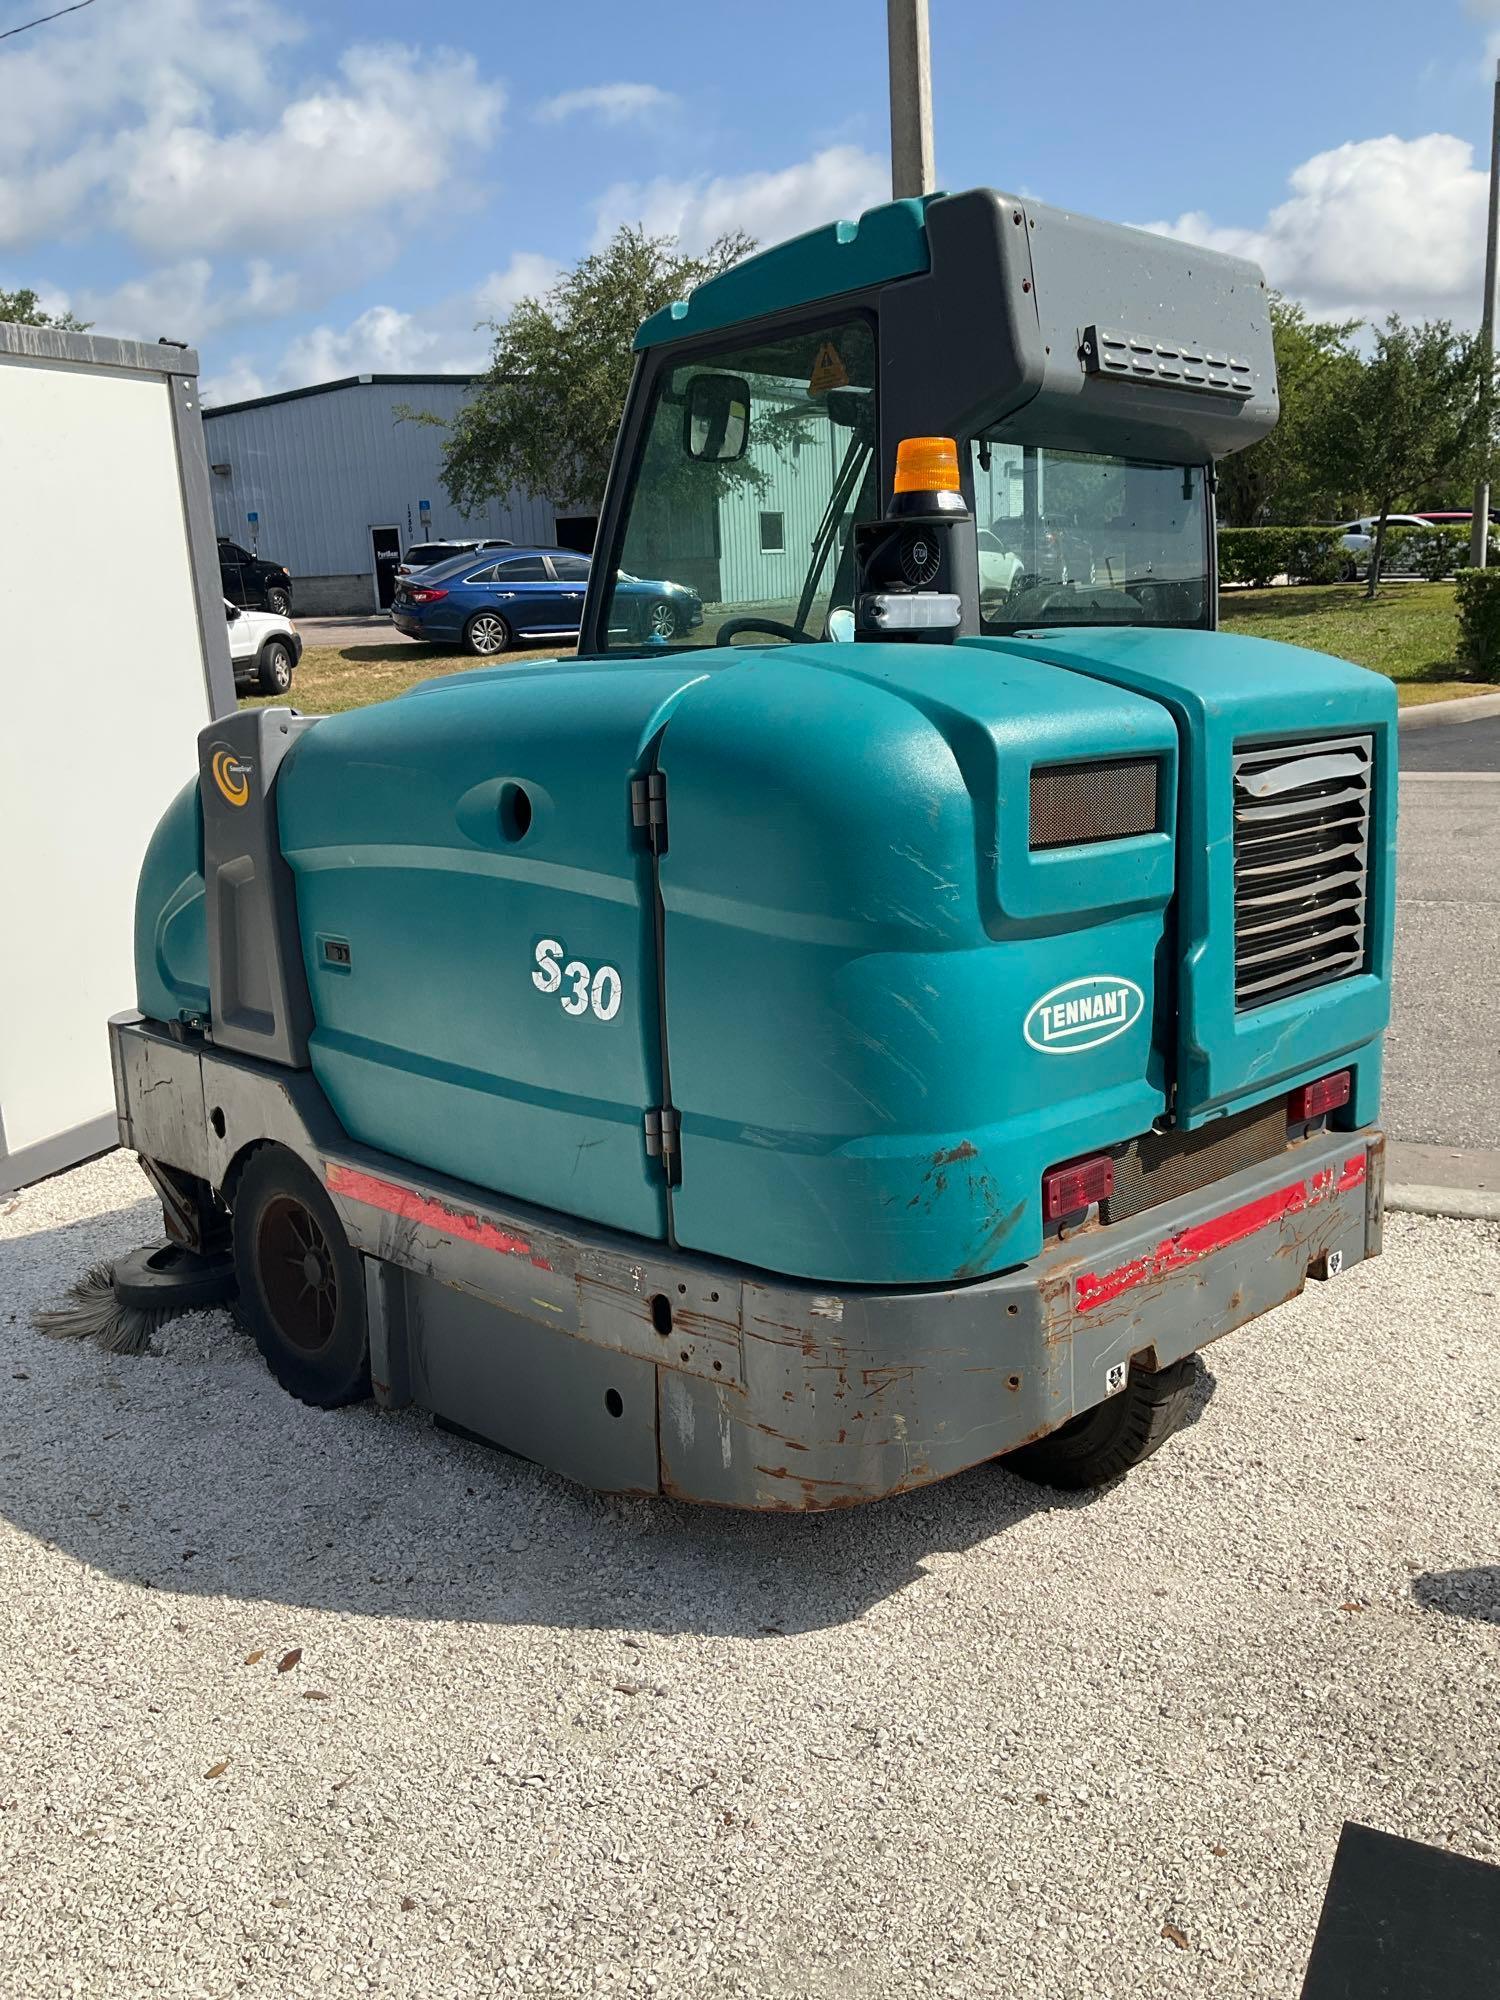 TENNANT RIDE ON SWEEPER MODEL S30, DIESEL, ENCLOSED CAD, TURNS OVER DOES NOT START